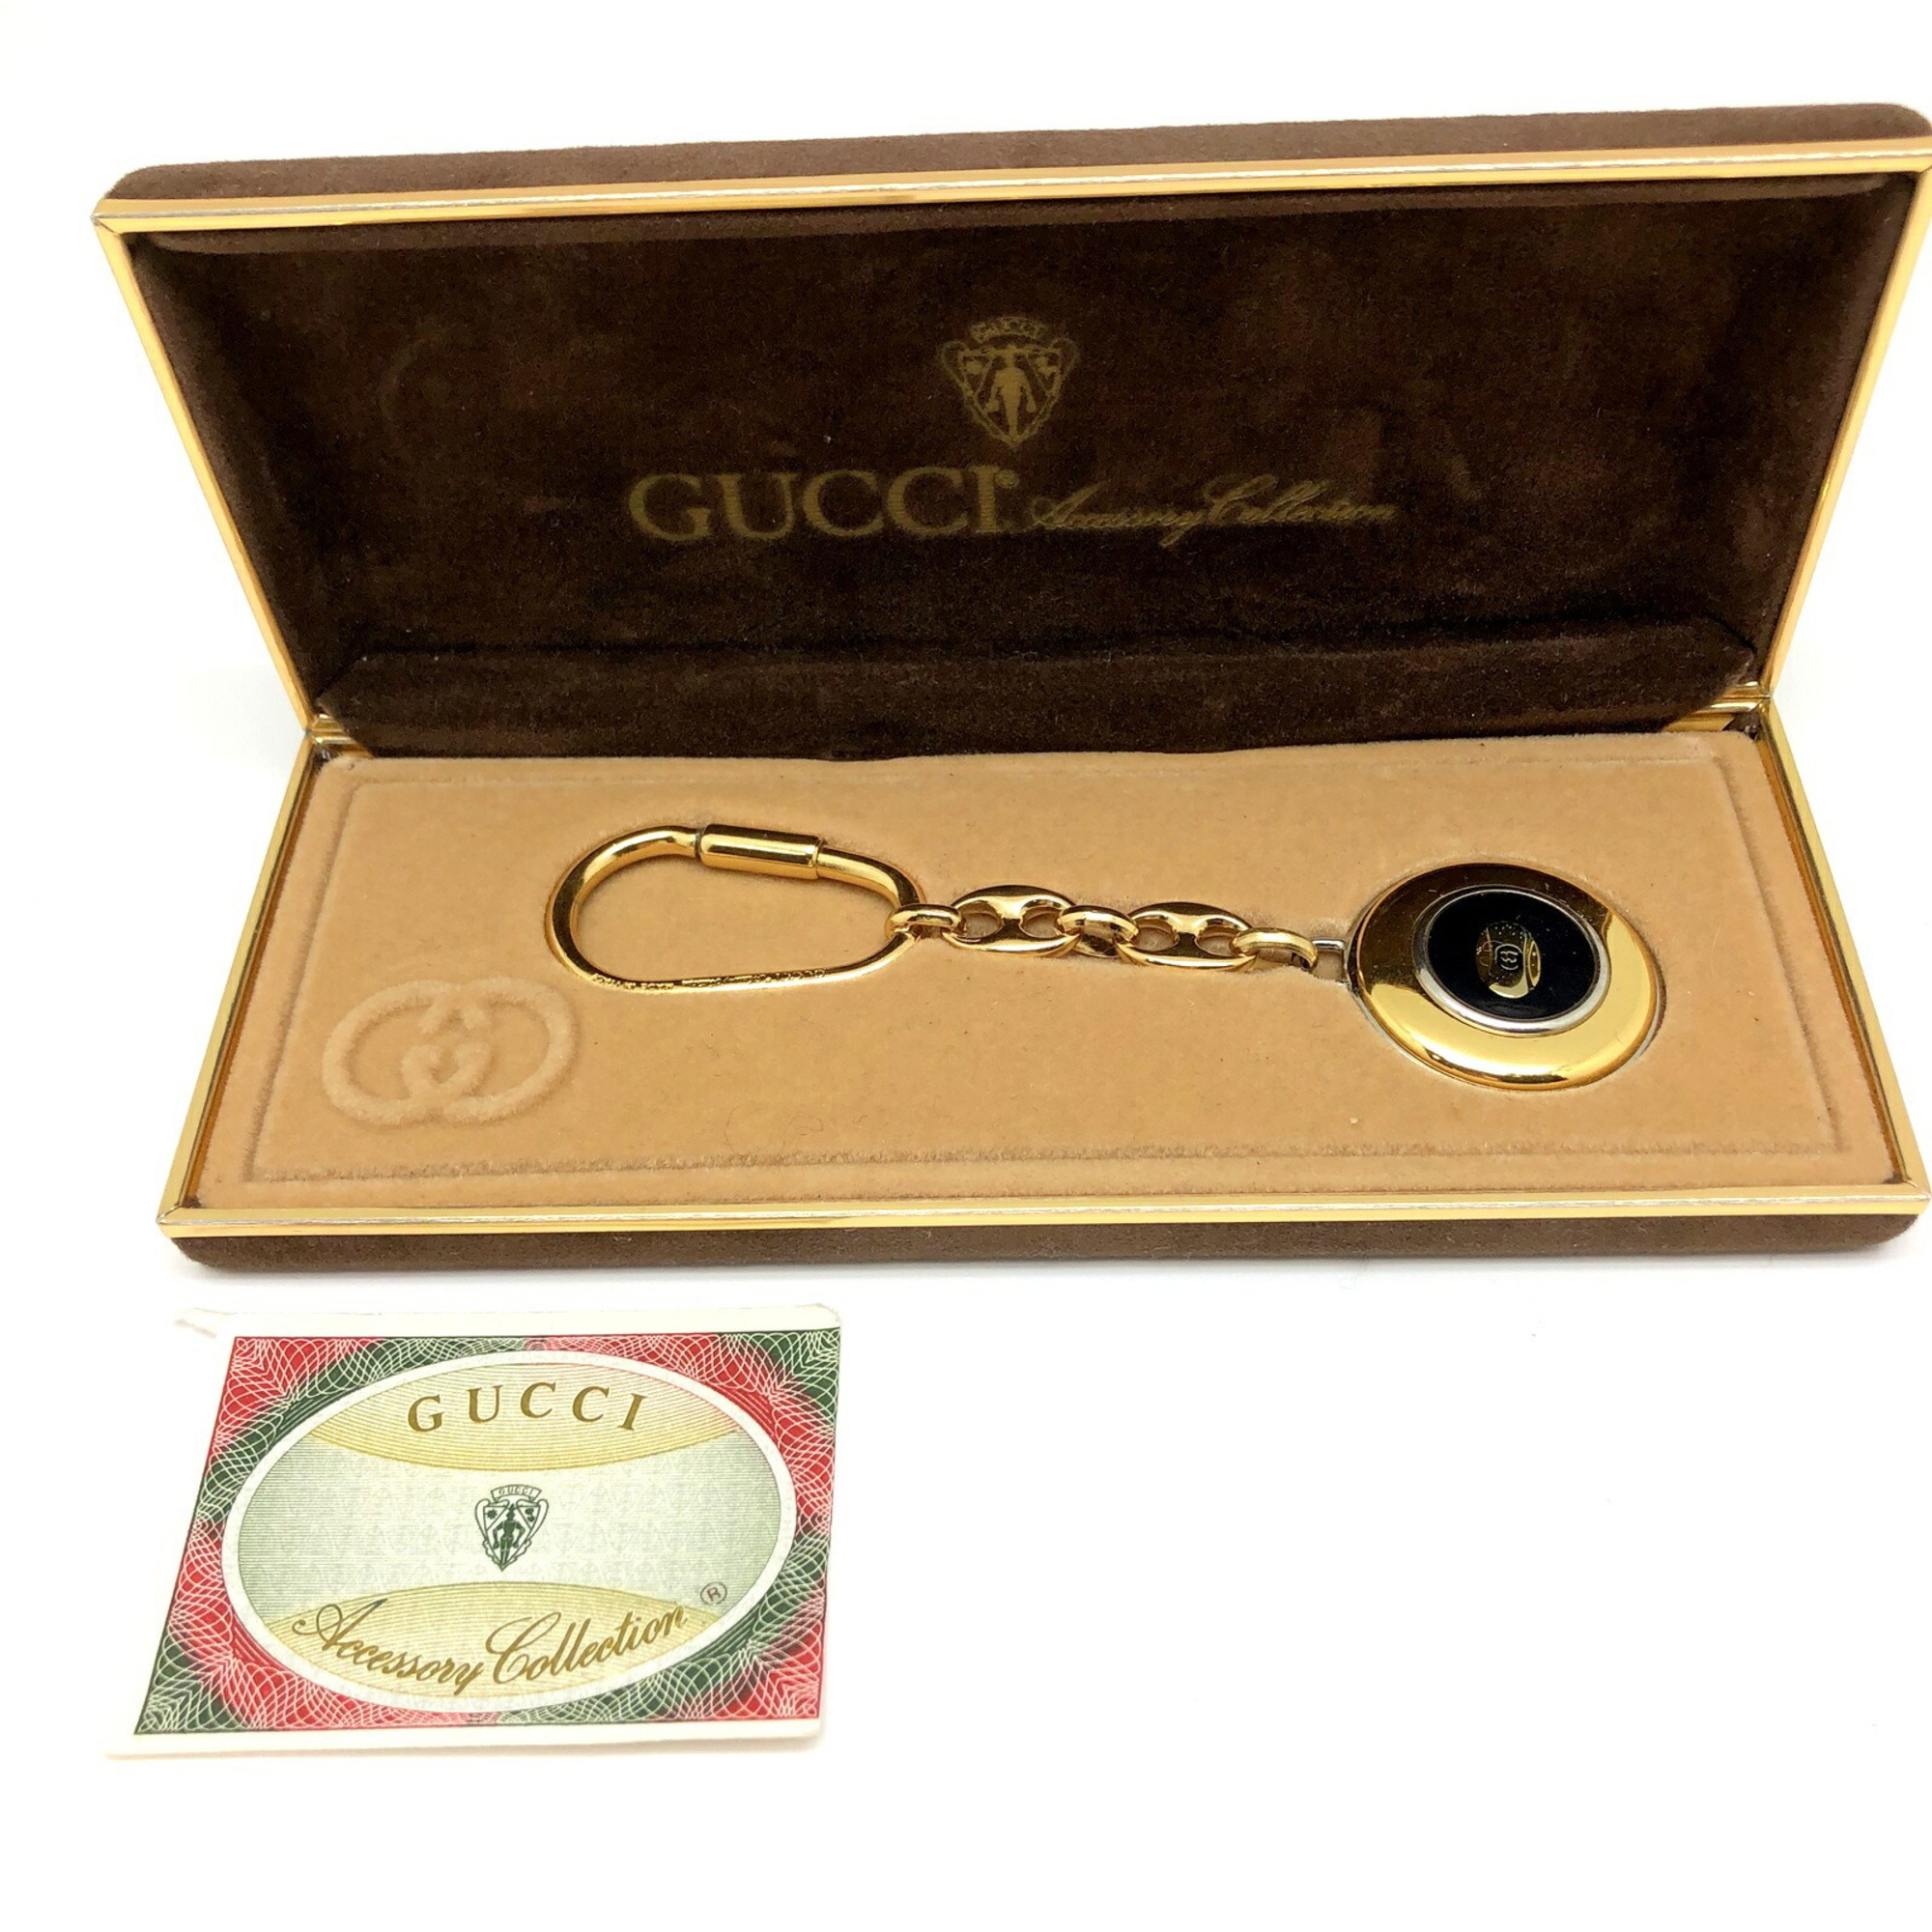 GUCCI Gucci Old Bag Charm Keychain Men's Women's ITC5GUX98OHS RM0804R